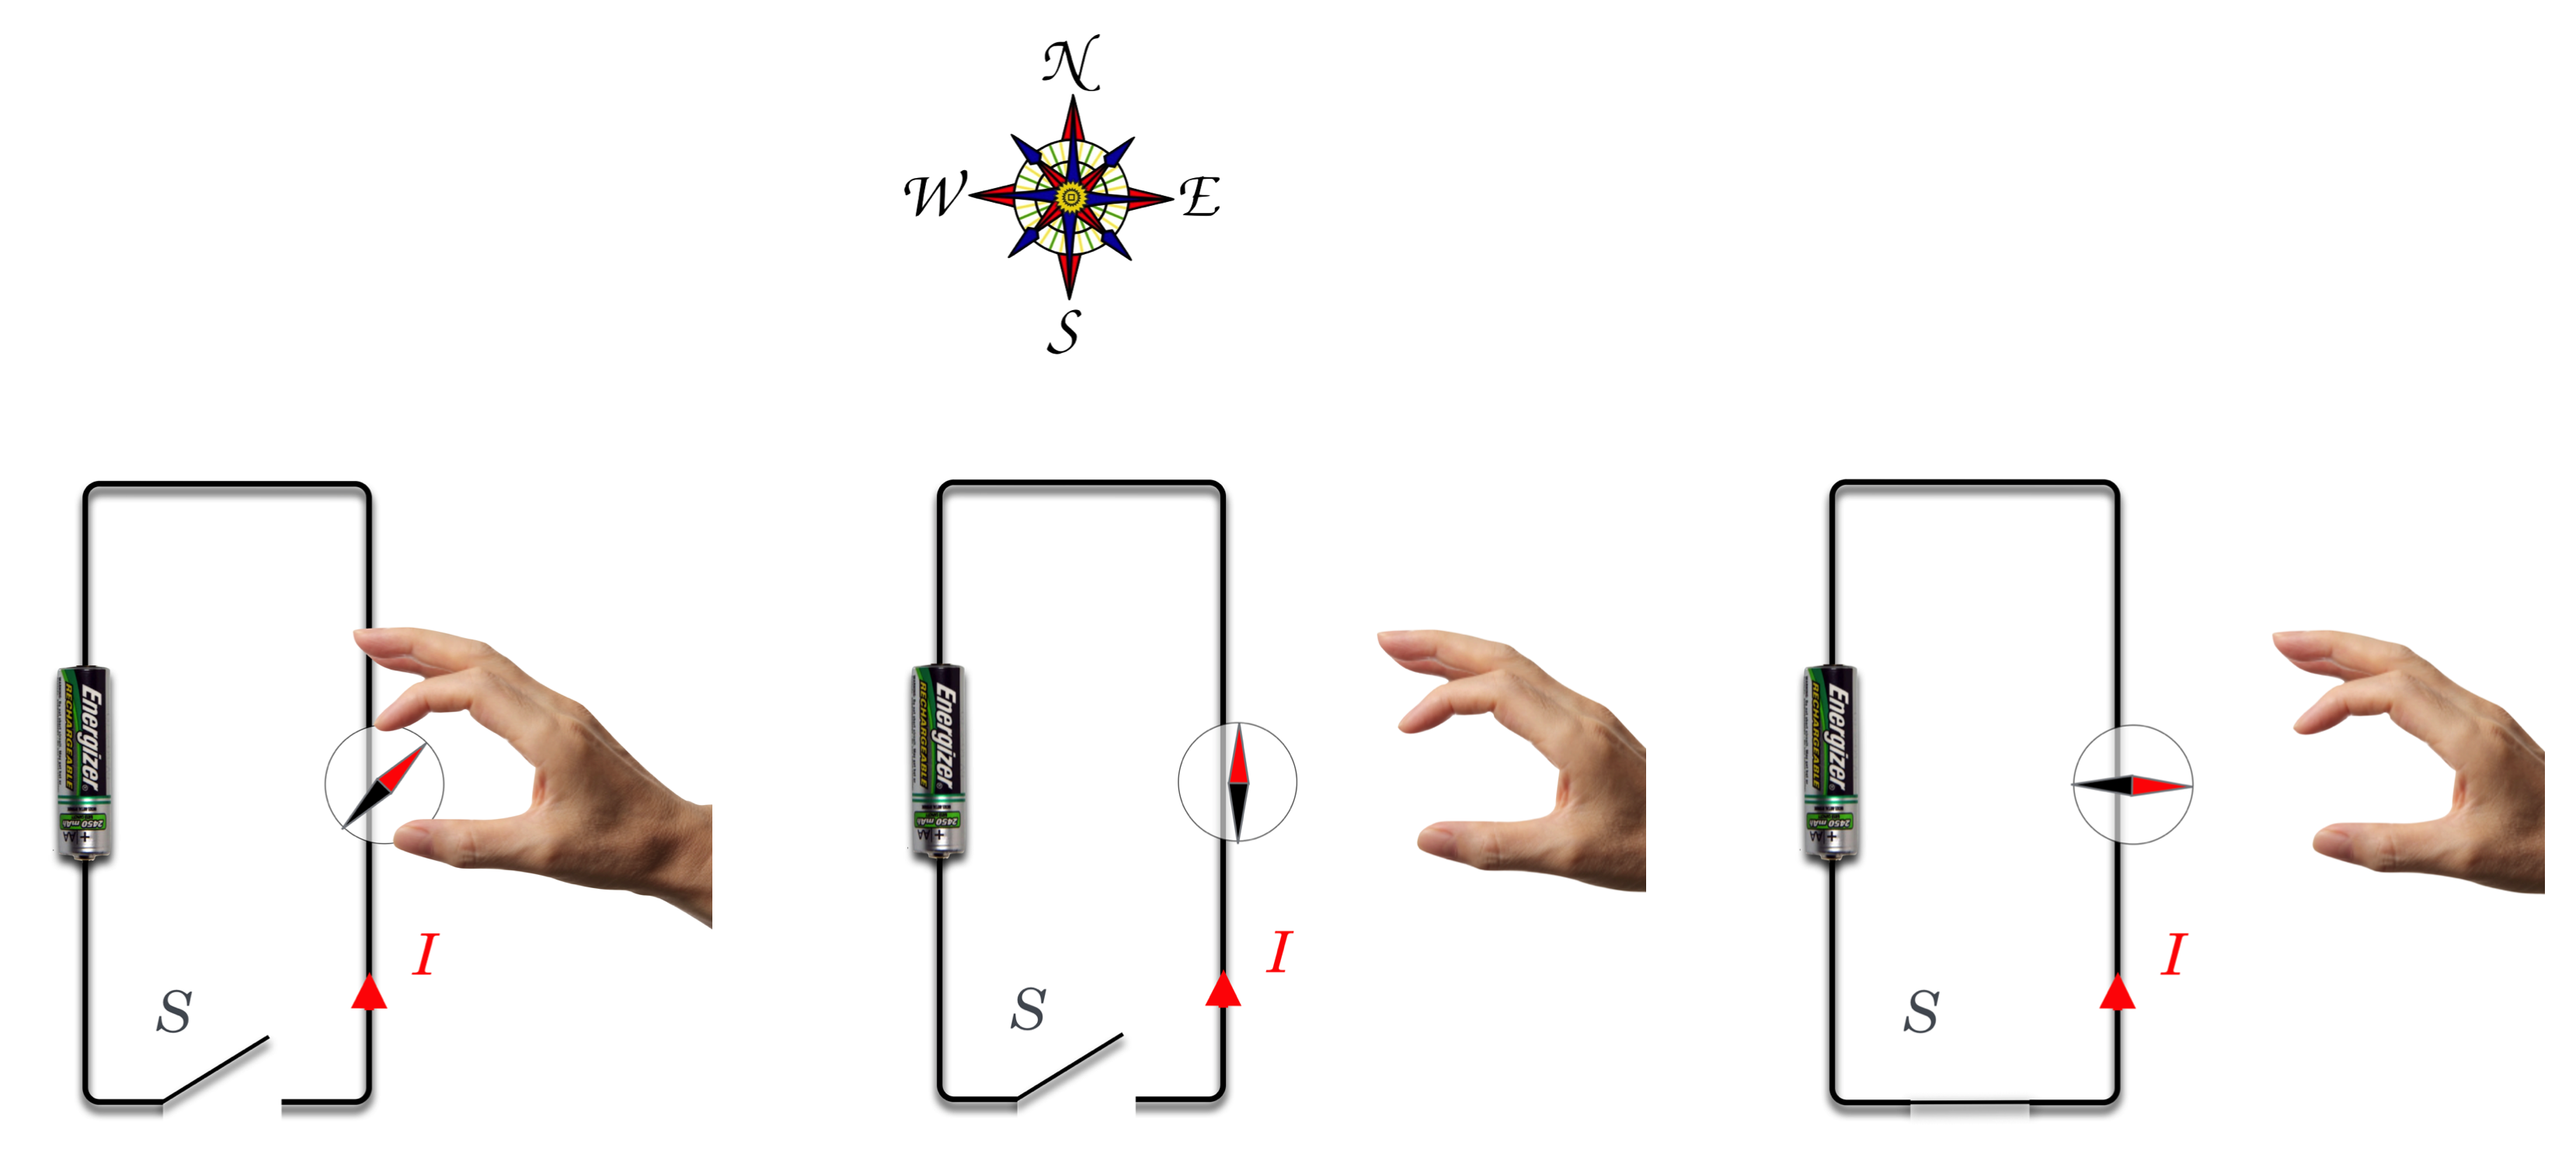 Shown is a circuit with a switch (S) and a battery with the positive pole down. When the switch would be closed, current would flow counterclockwise. In (a) a disembodied hand brings a compass near to the wire. In (b) the compass recognizes that magnetic North is to the top of the figure and it points that way...as is the job of a compass. Then in (c) S is closed and current flows as shown and Oersted’s discovery was that the compass “forgets” all about the puny Earth’s magnetic field and responds to the current.